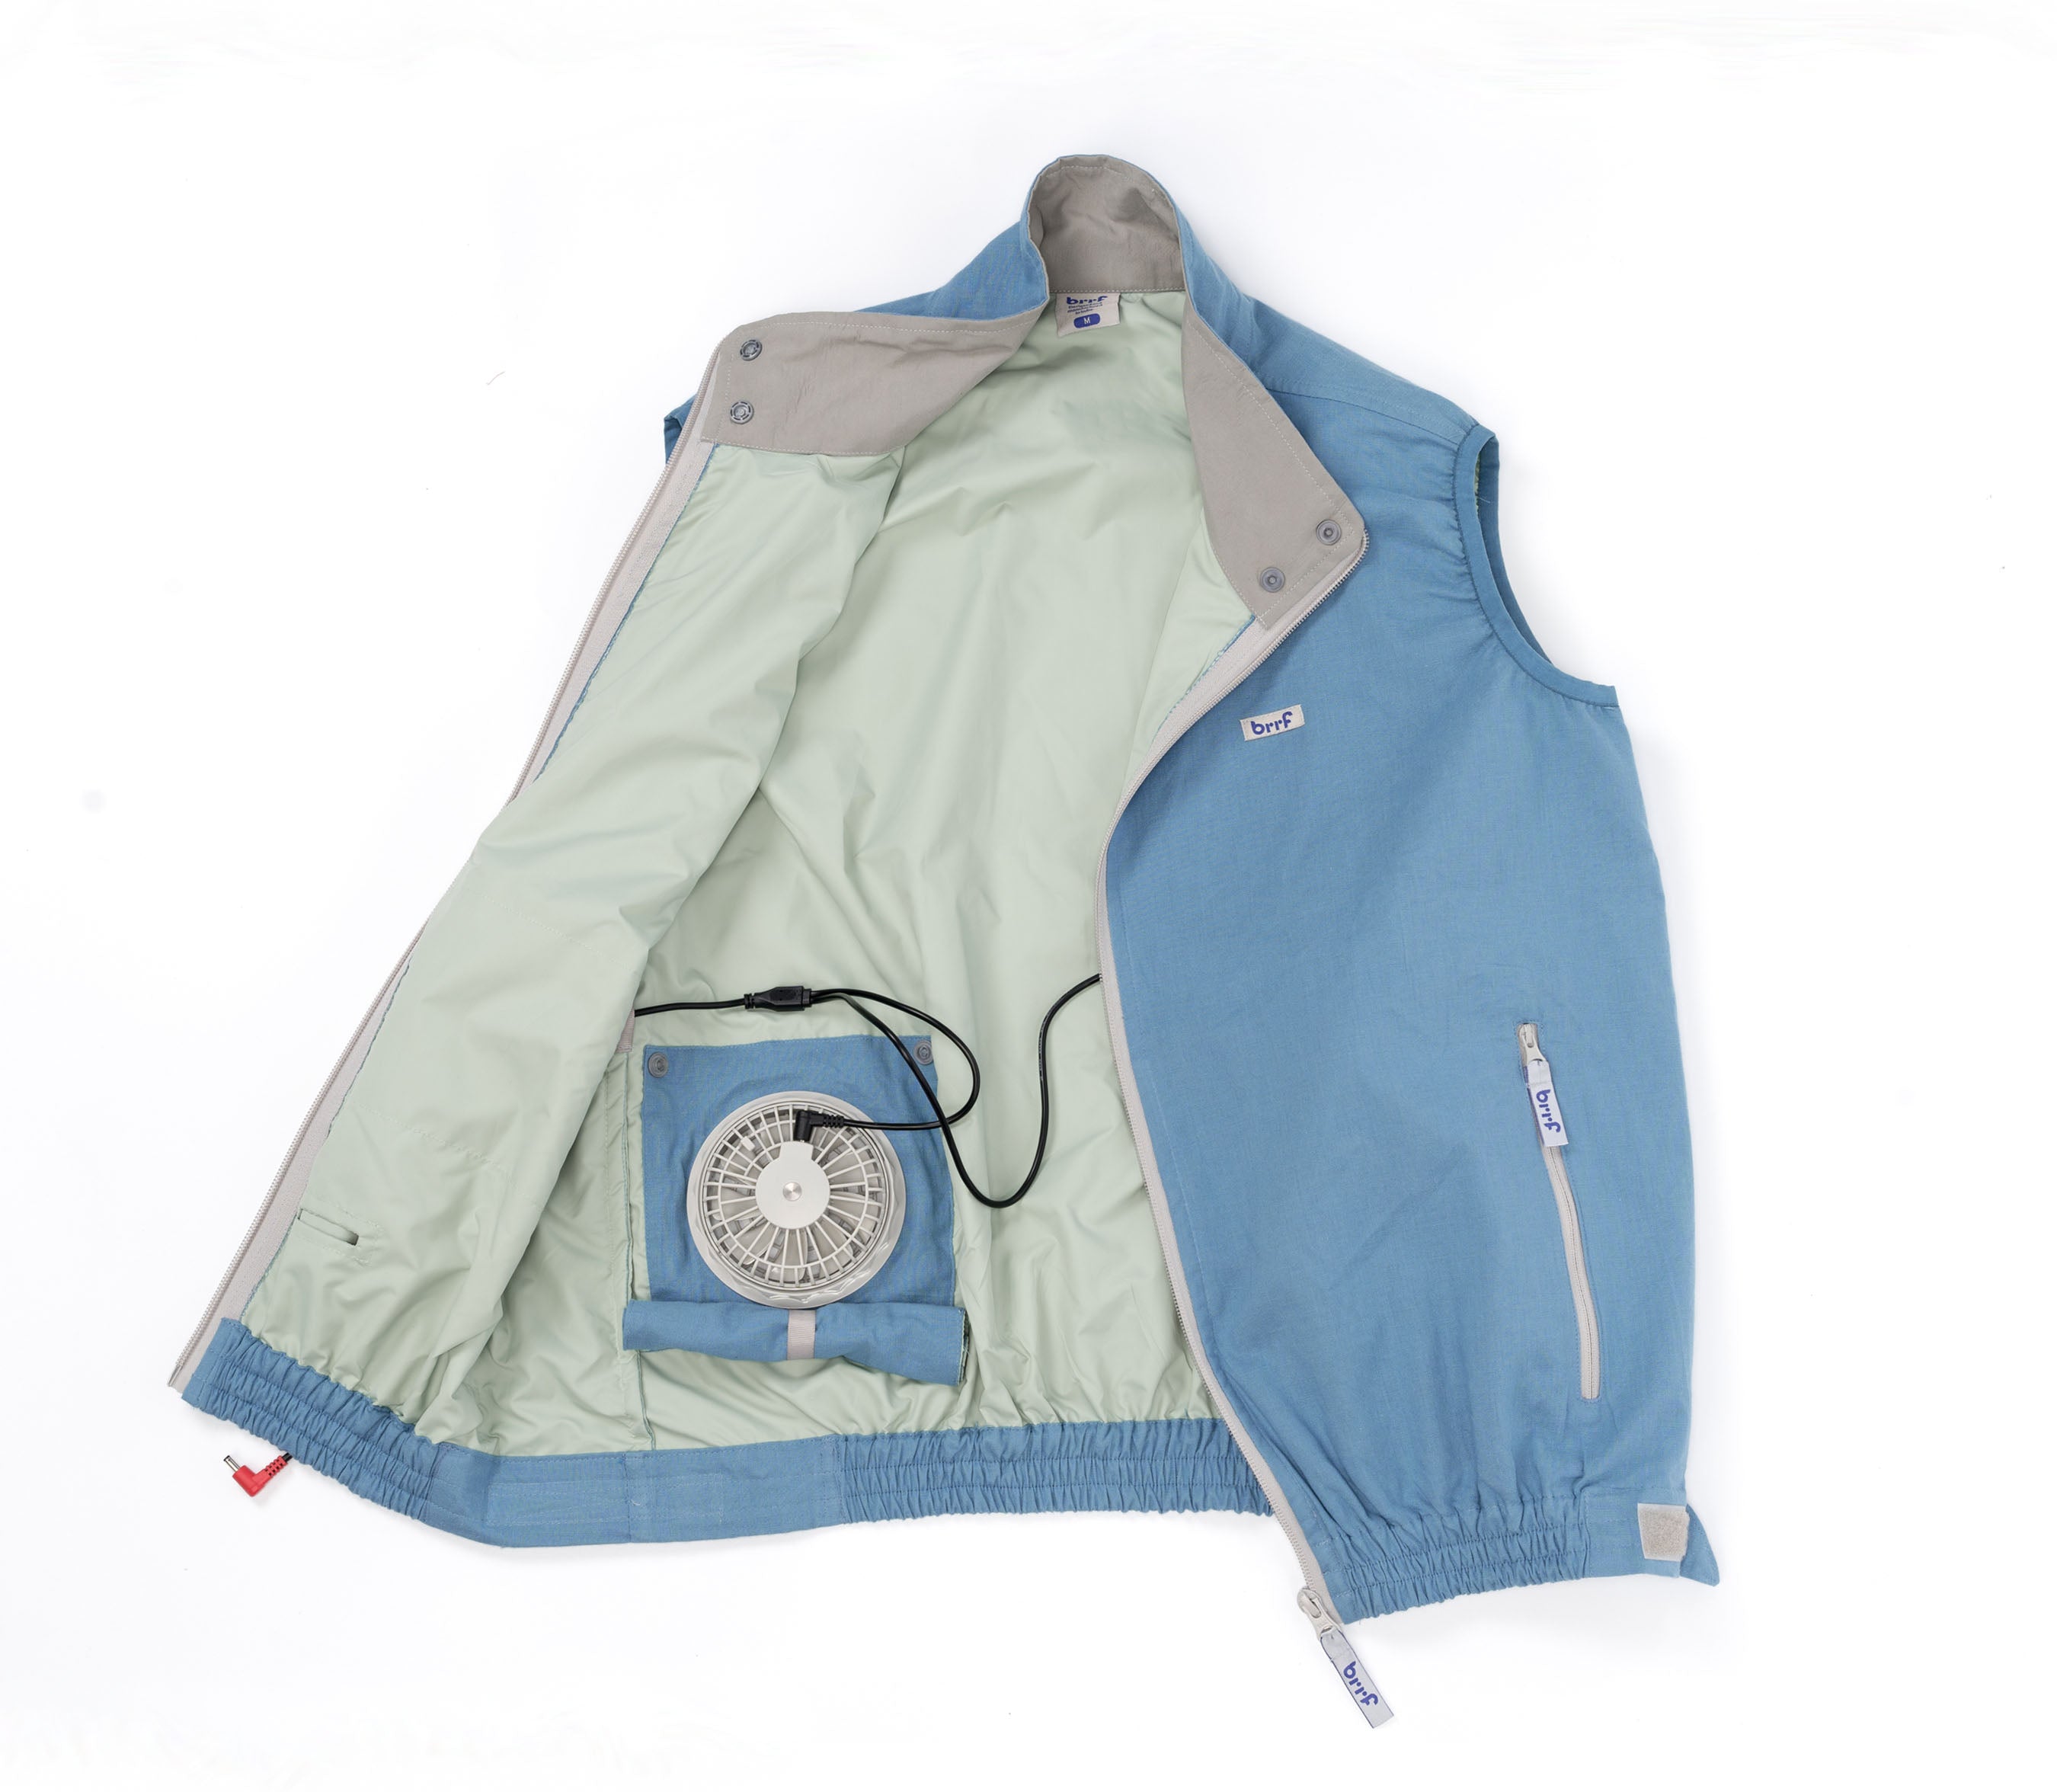 Air-Conditioned Clothing - Cotton - brrf basic (with 10000 mAh Power Bank Included)